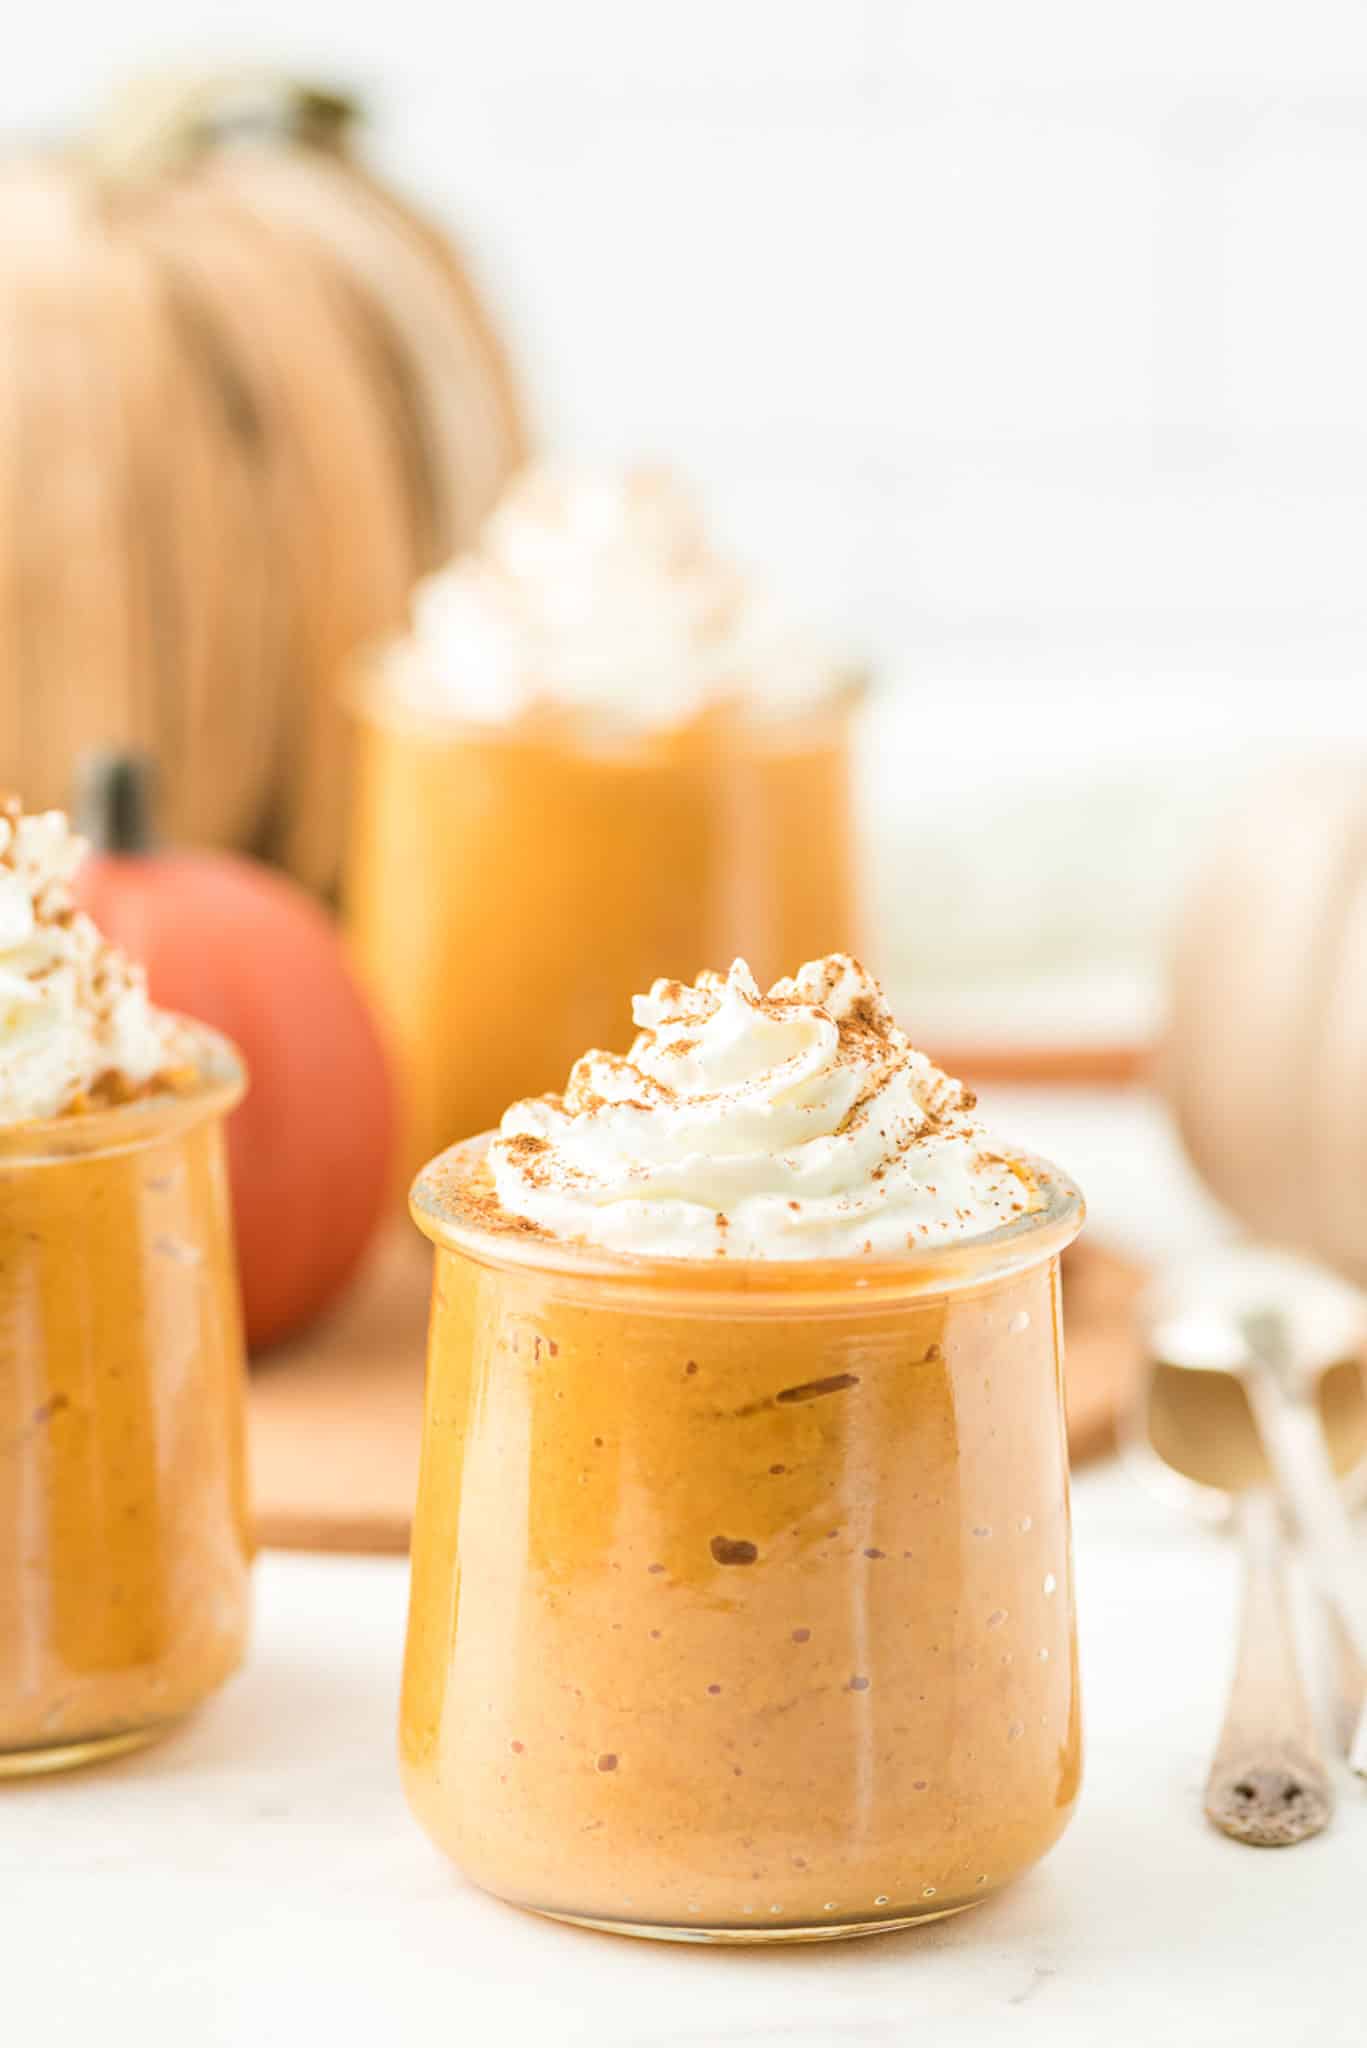 jars of pumpkin pudding with whipped topping ready to eat.